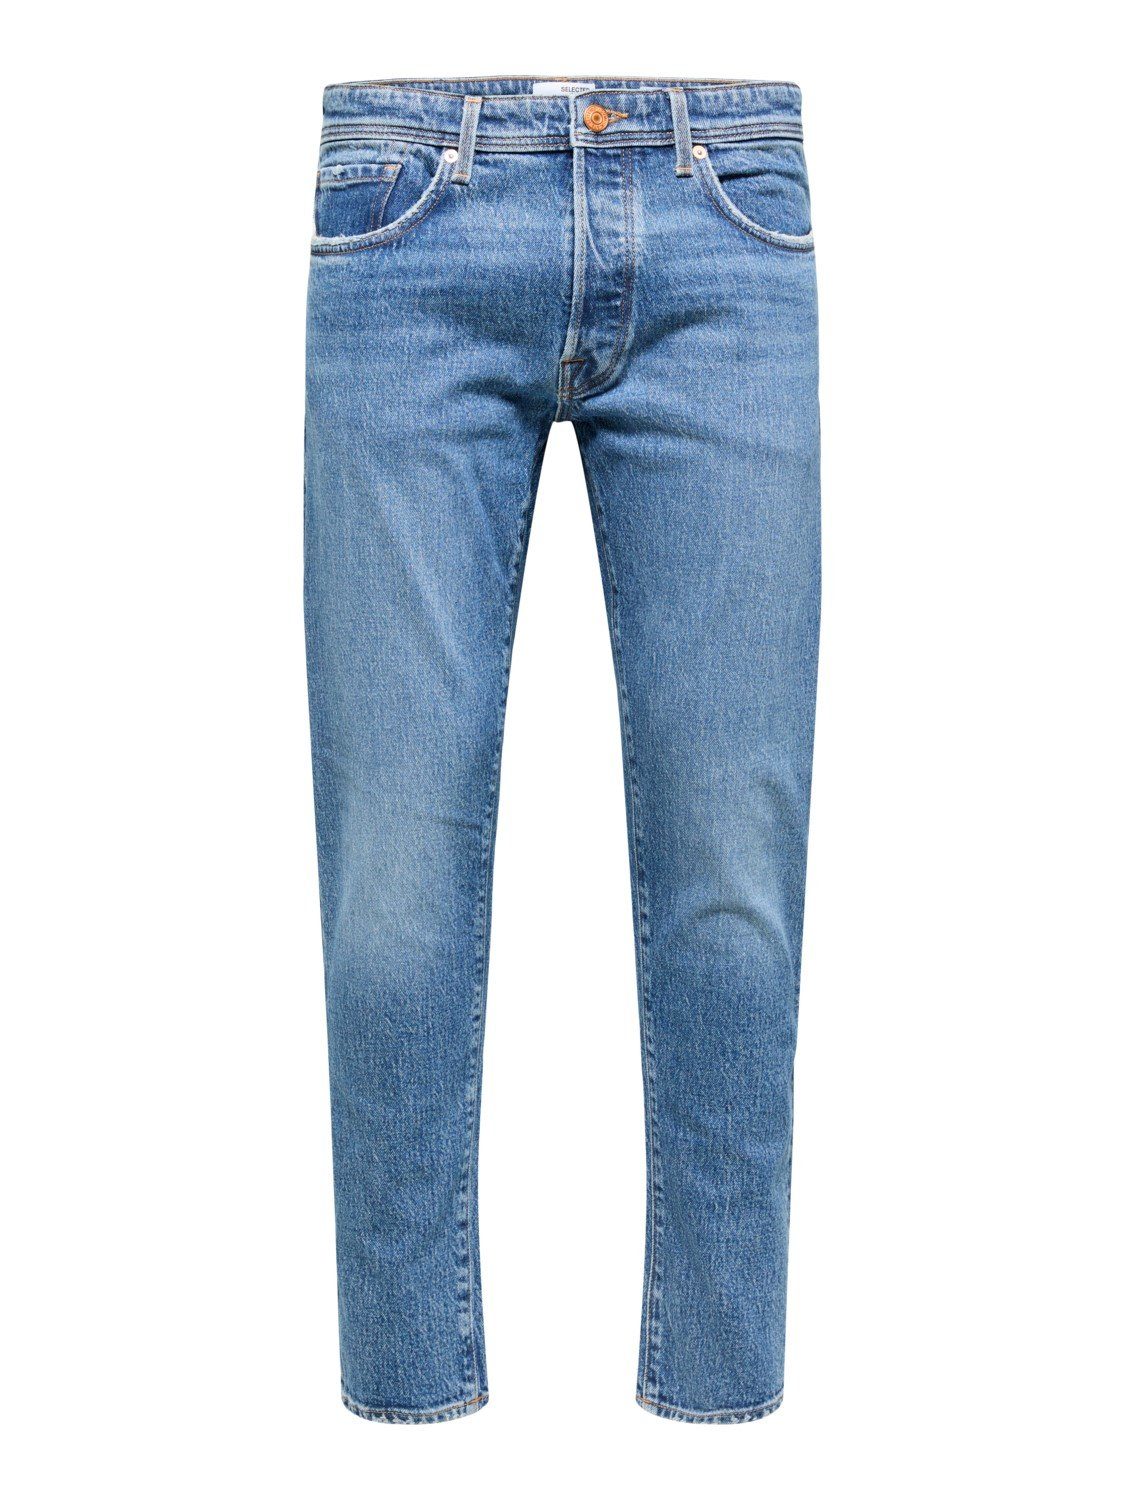 SELECTED HOMME Slim-fit-Jeans Stretch mit TOBY 3070 SLH172-SLIMTAPE